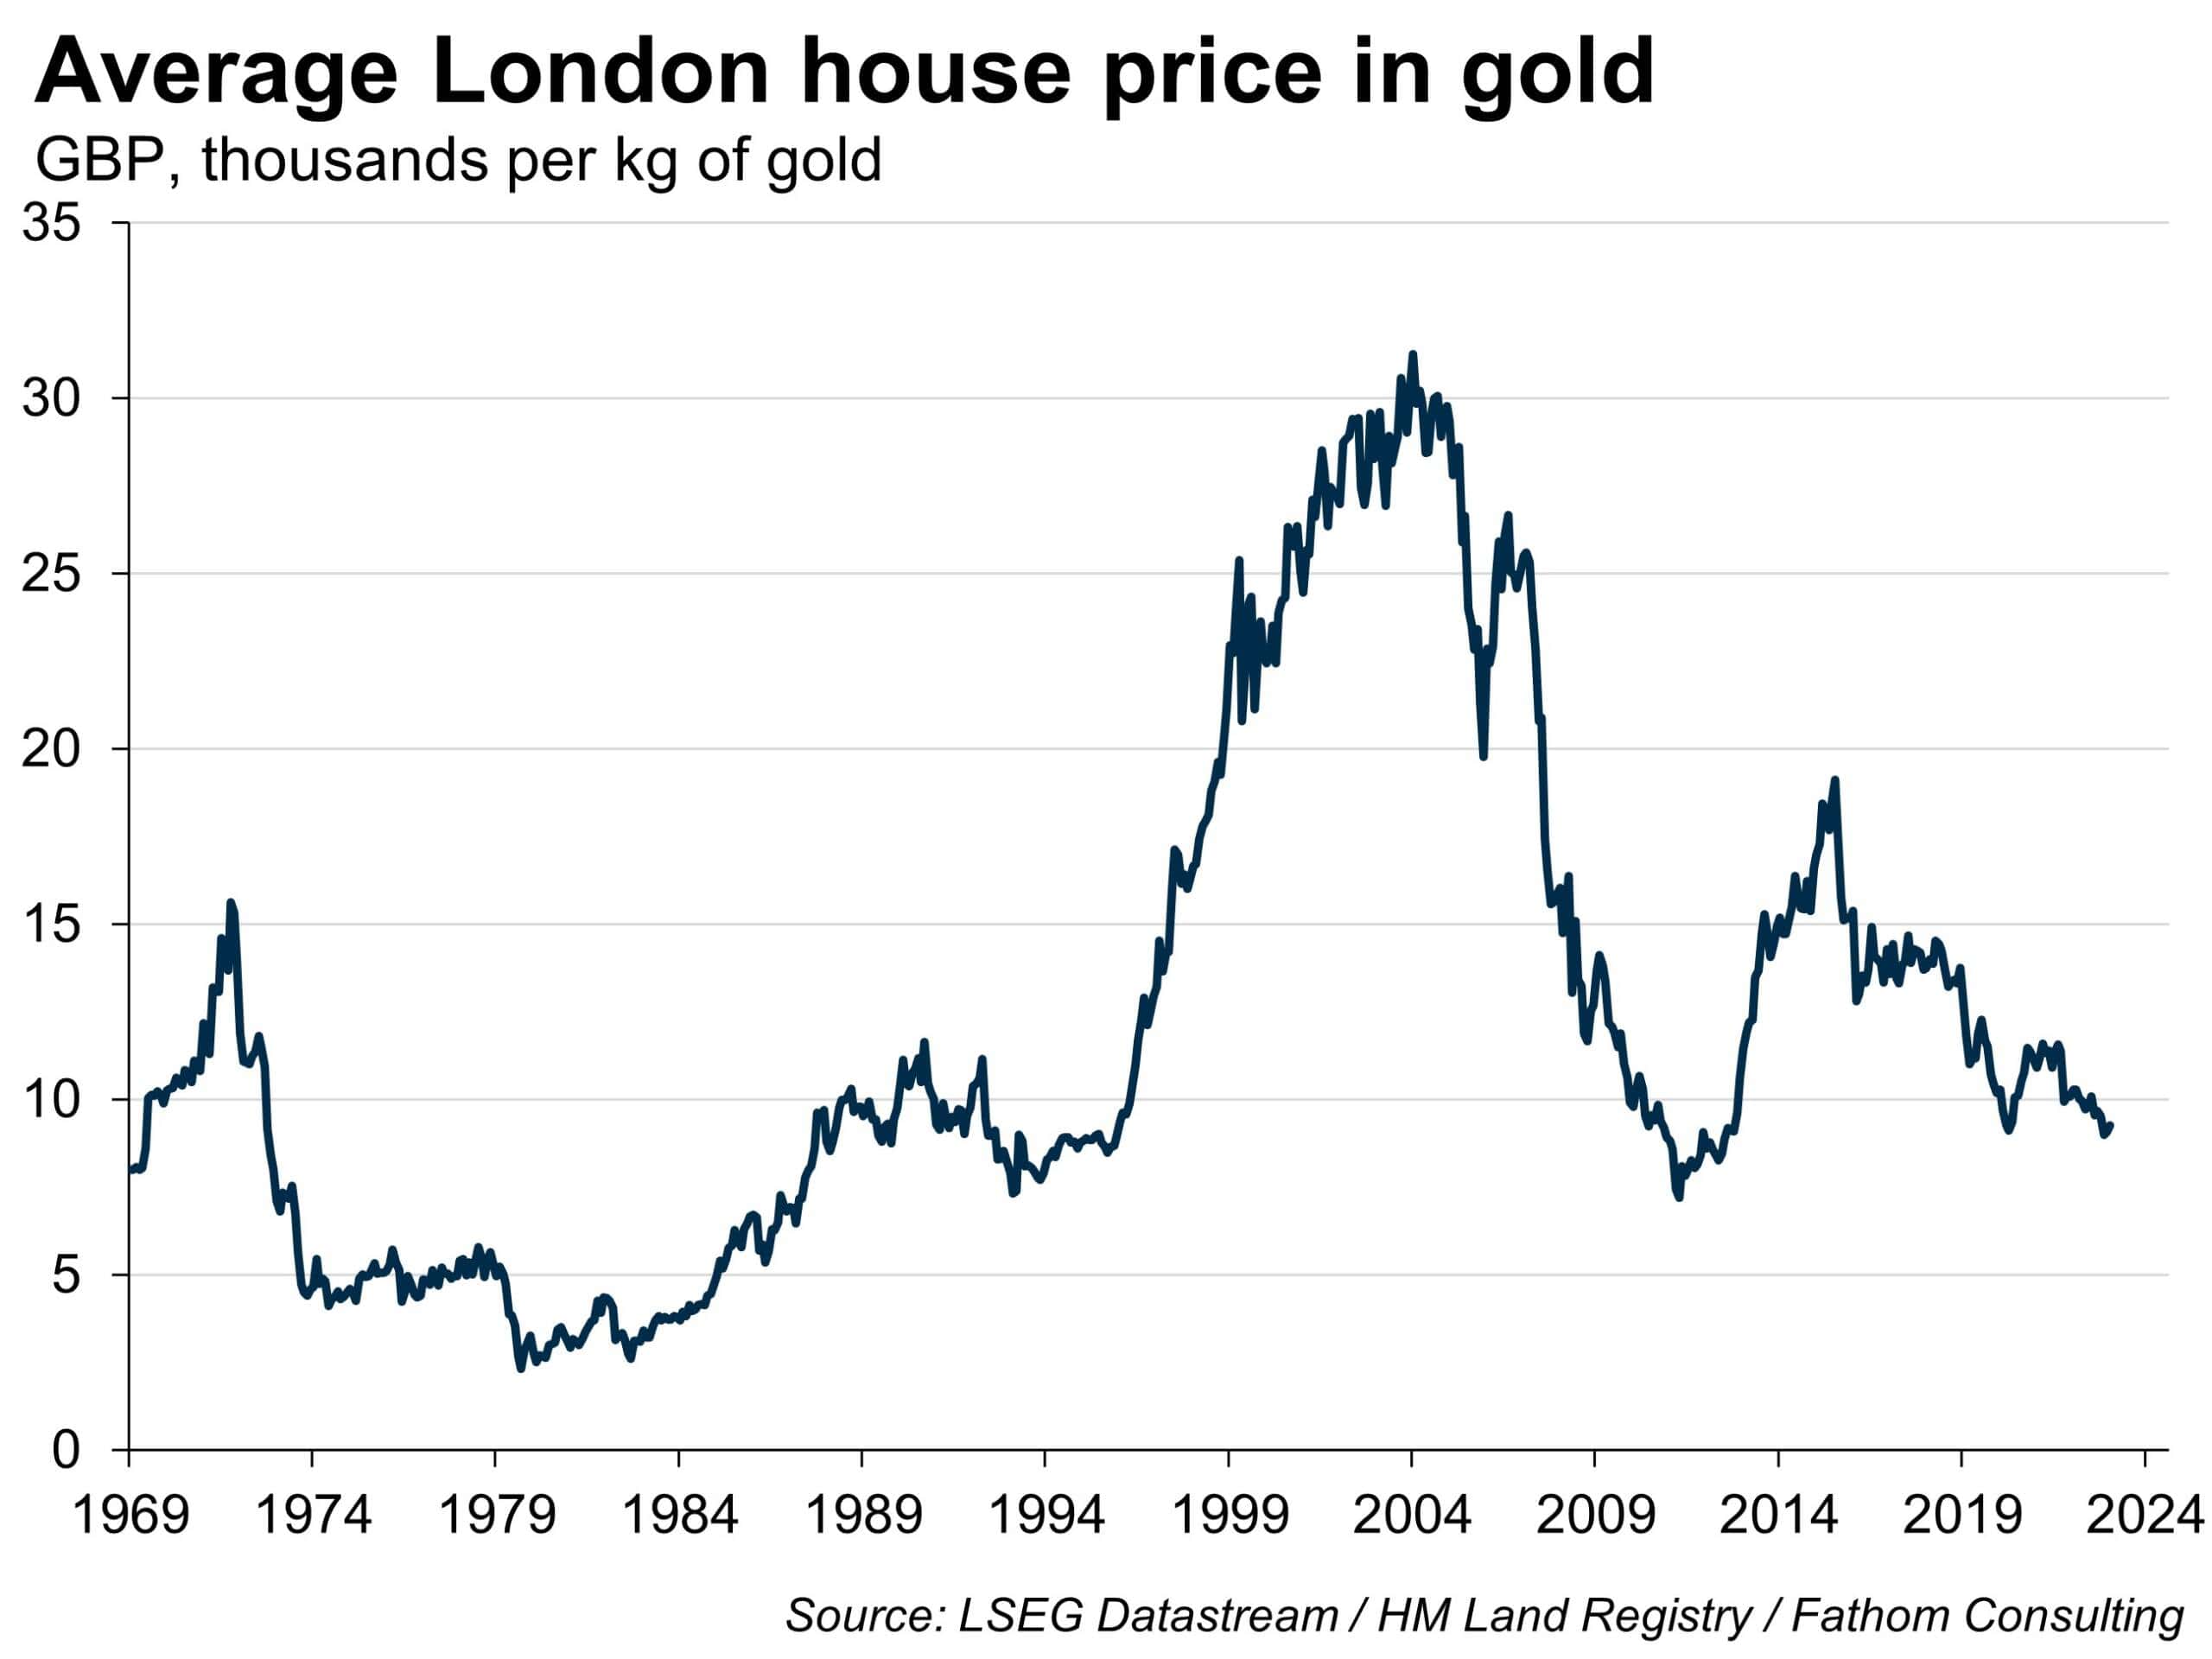 London house prices do not look such a never-ending escalator when priced in gold